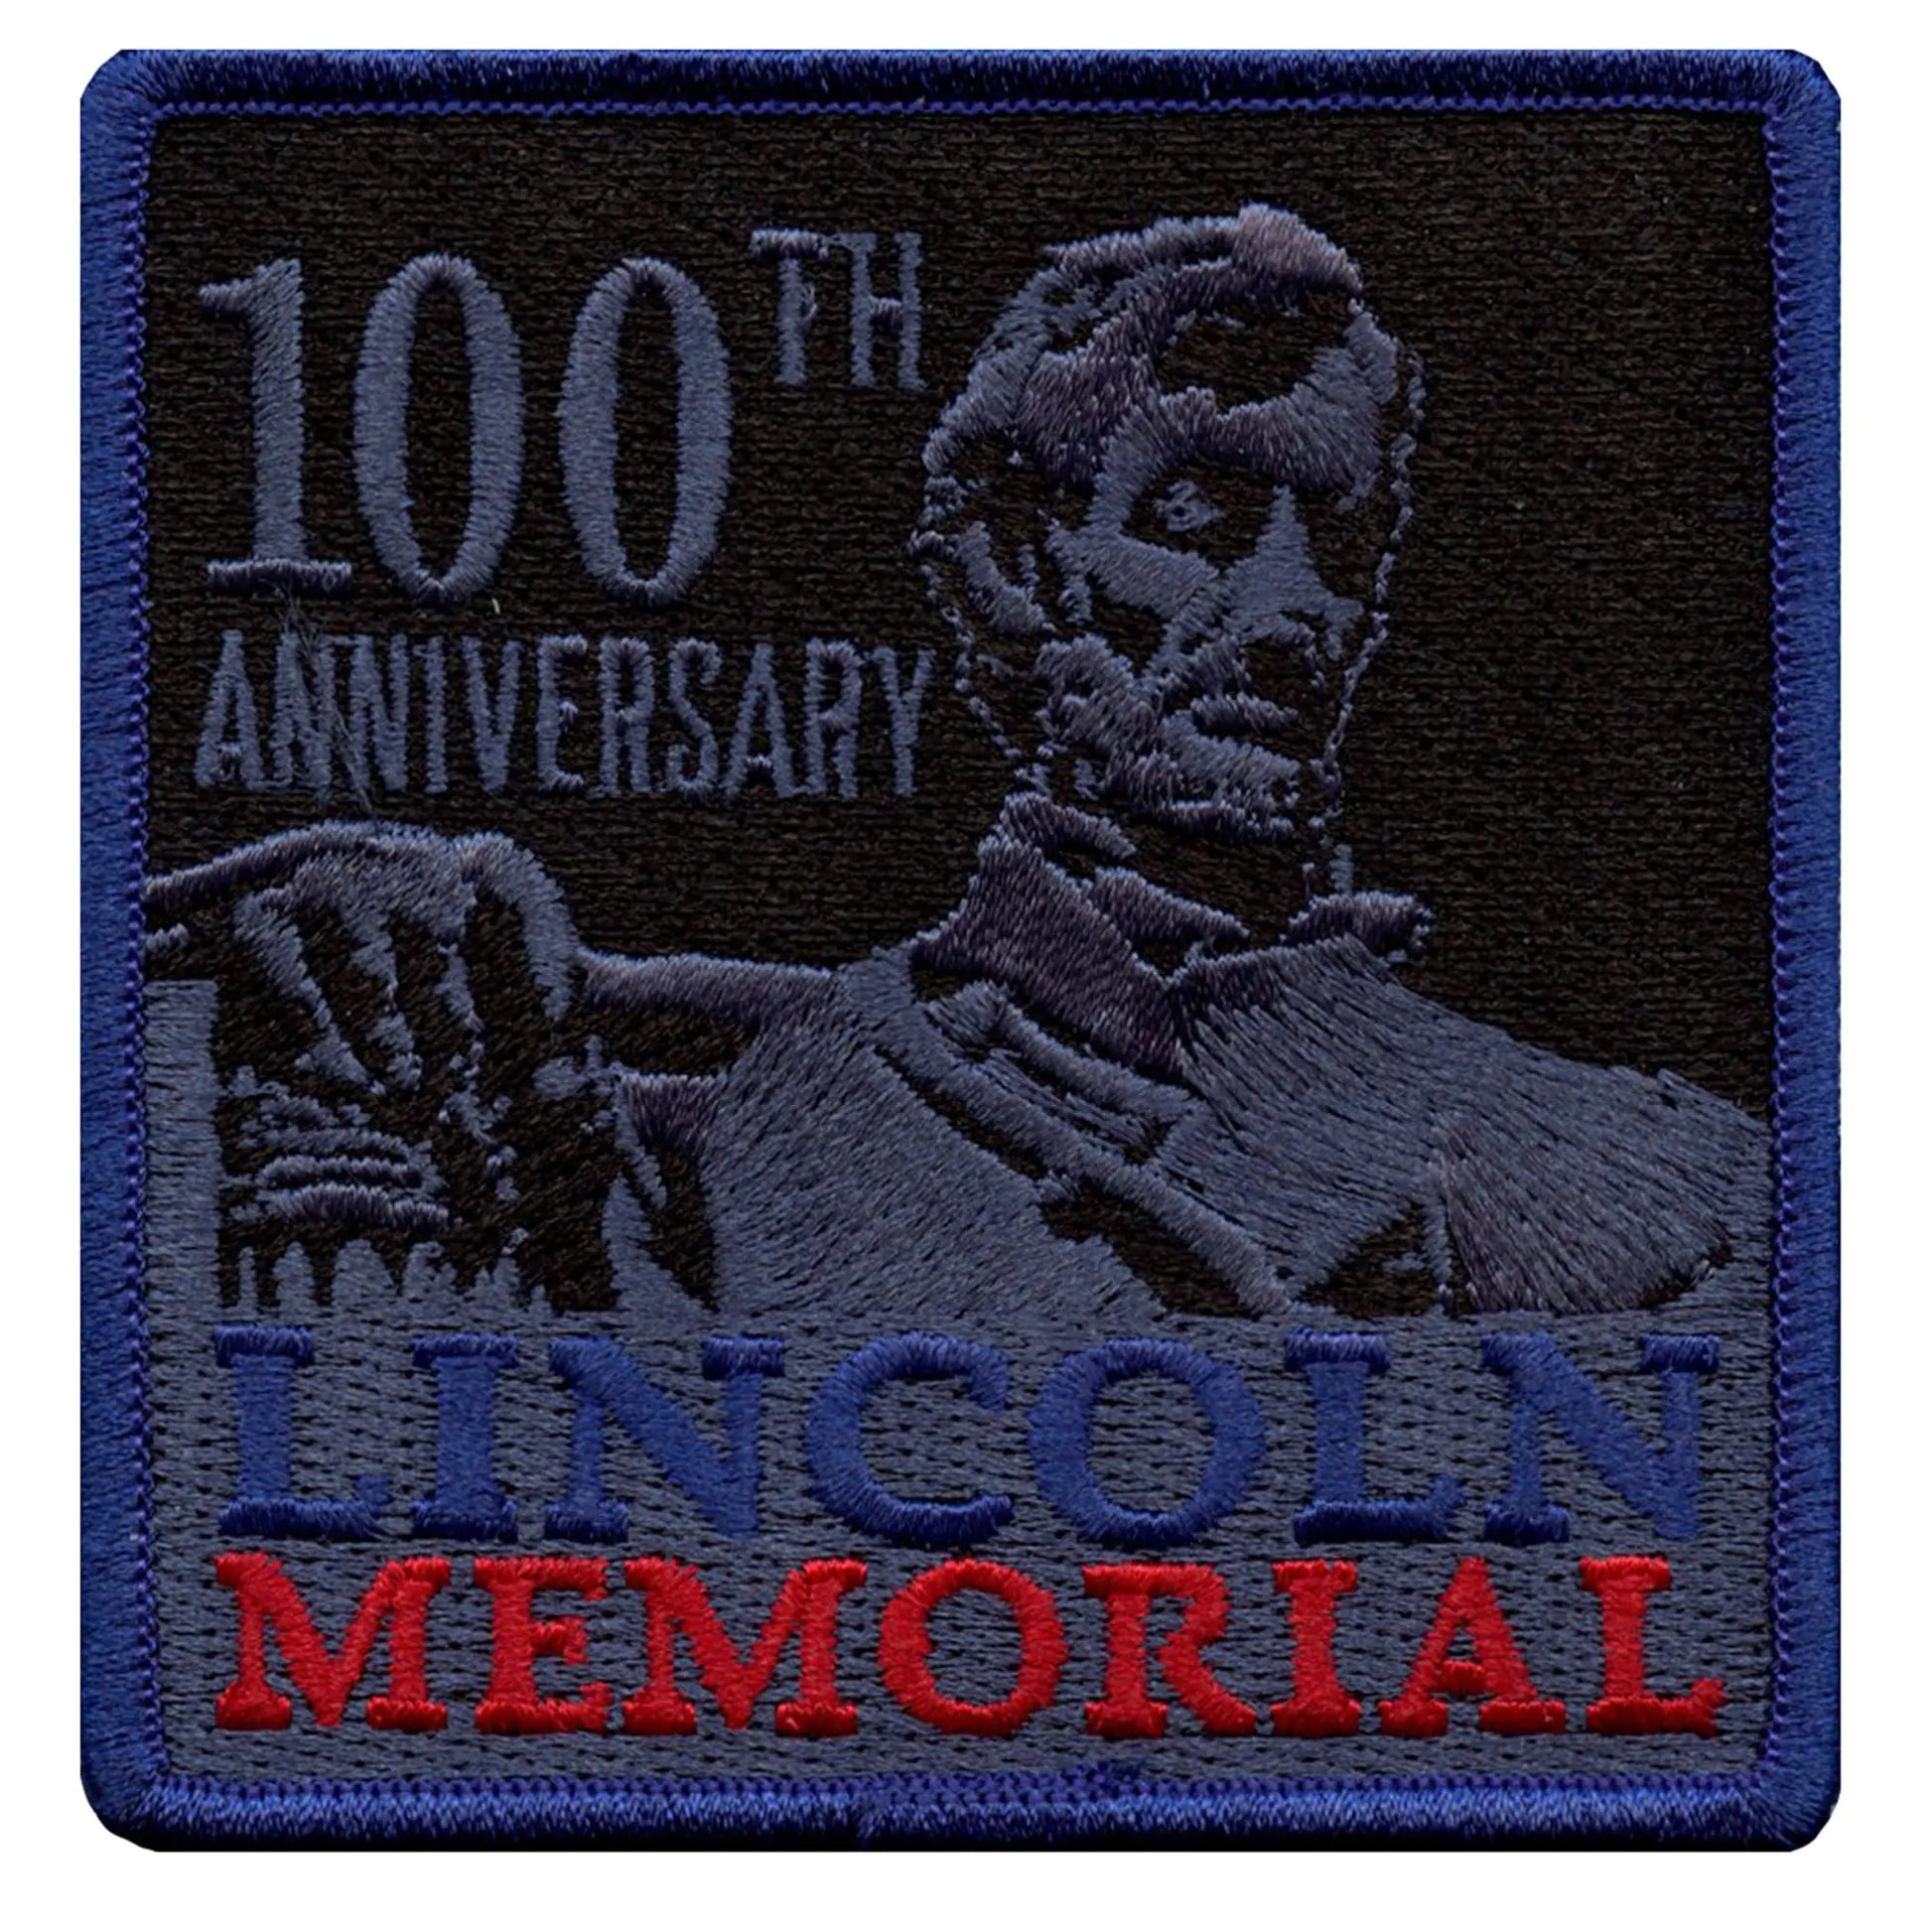 Lincoln Memorial 100th Anniversary Patch National Monument Travel Embroidered Iron On